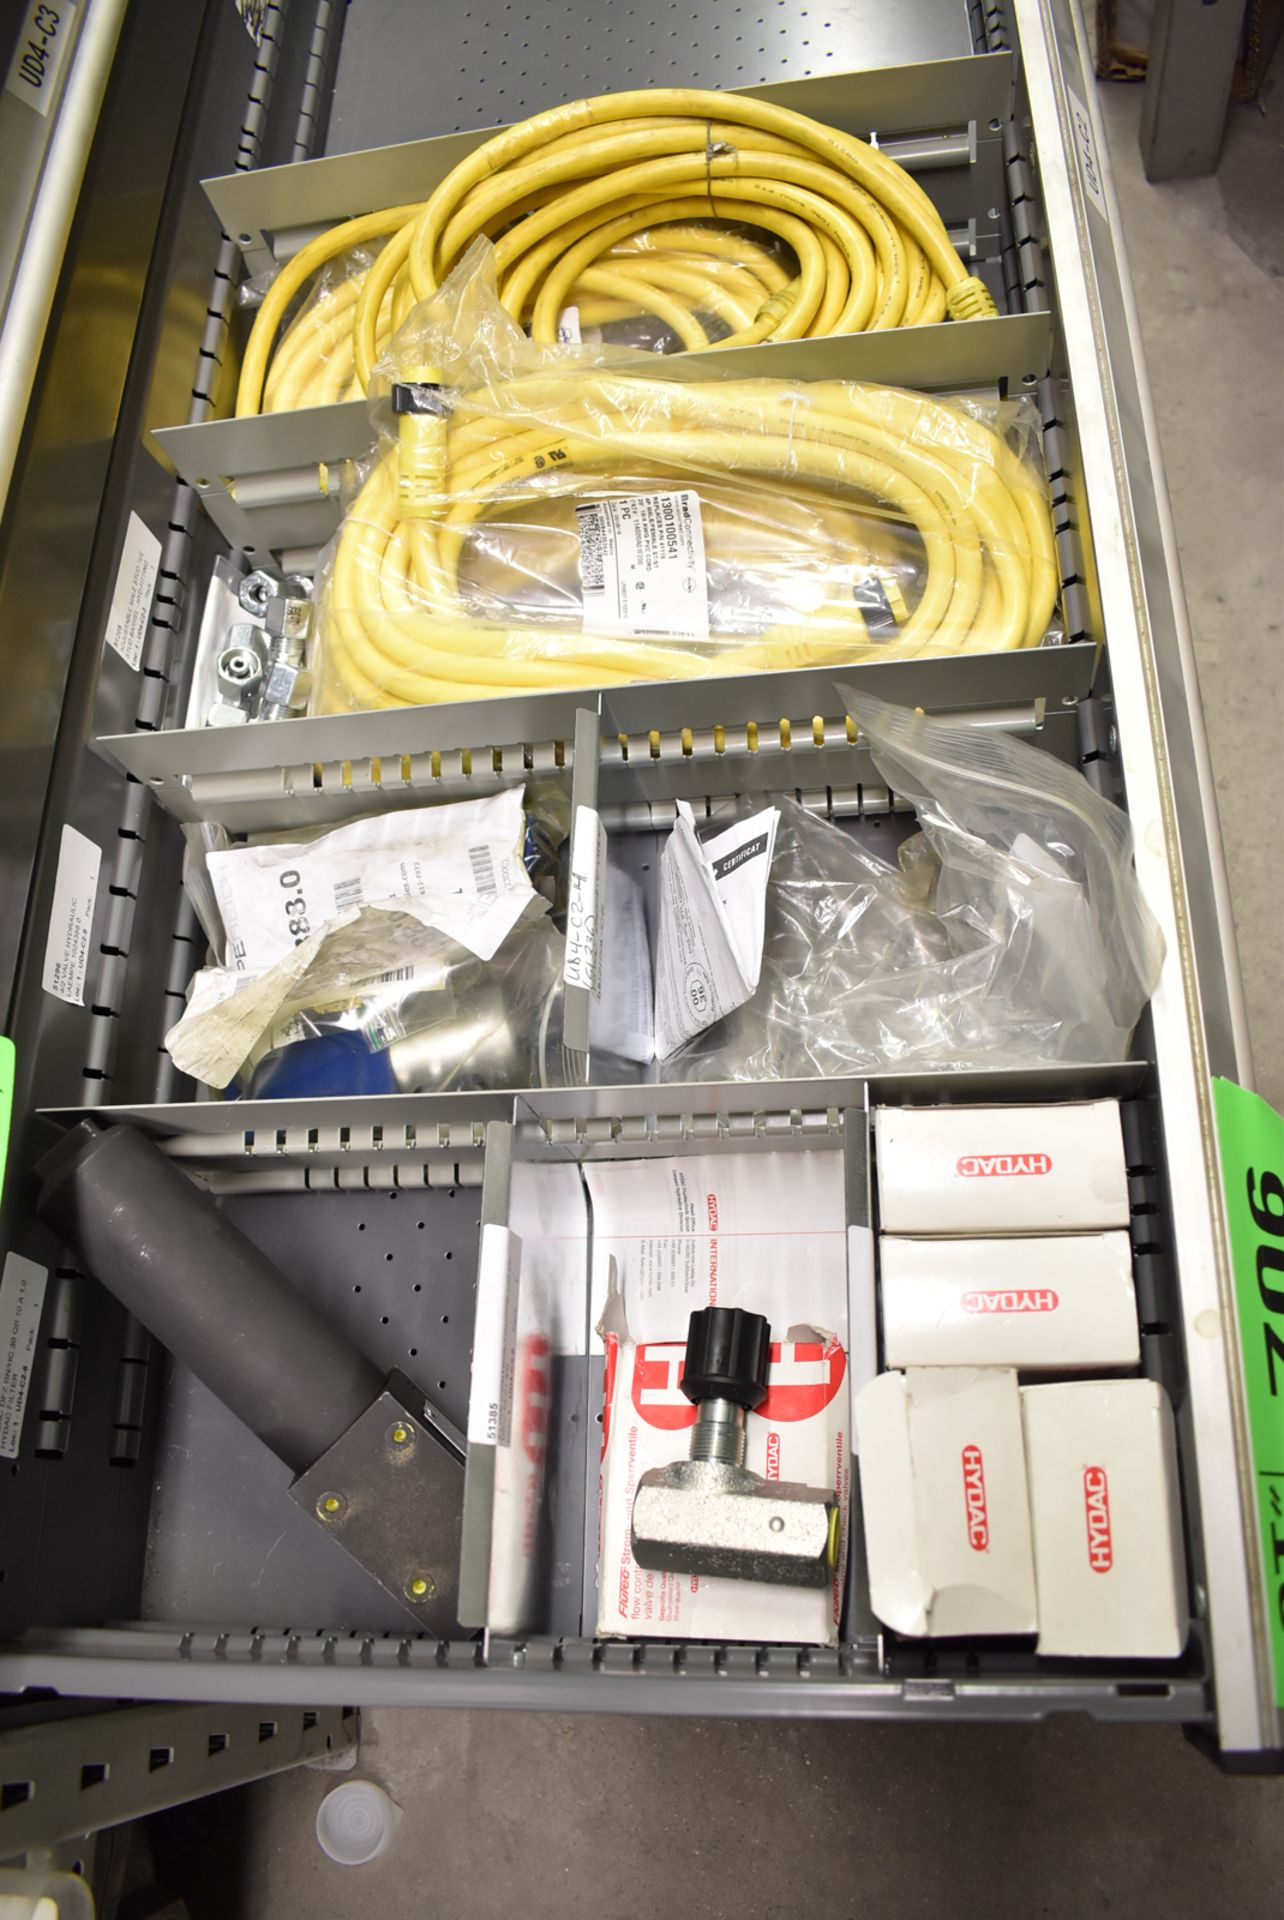 LOT/ CONTENTS OF DRAWER INCLUDING CHECK VALVES, HYDRAULIC VALVES, CONNECTOR CABLES, SPARE PARTS & - Image 2 of 2